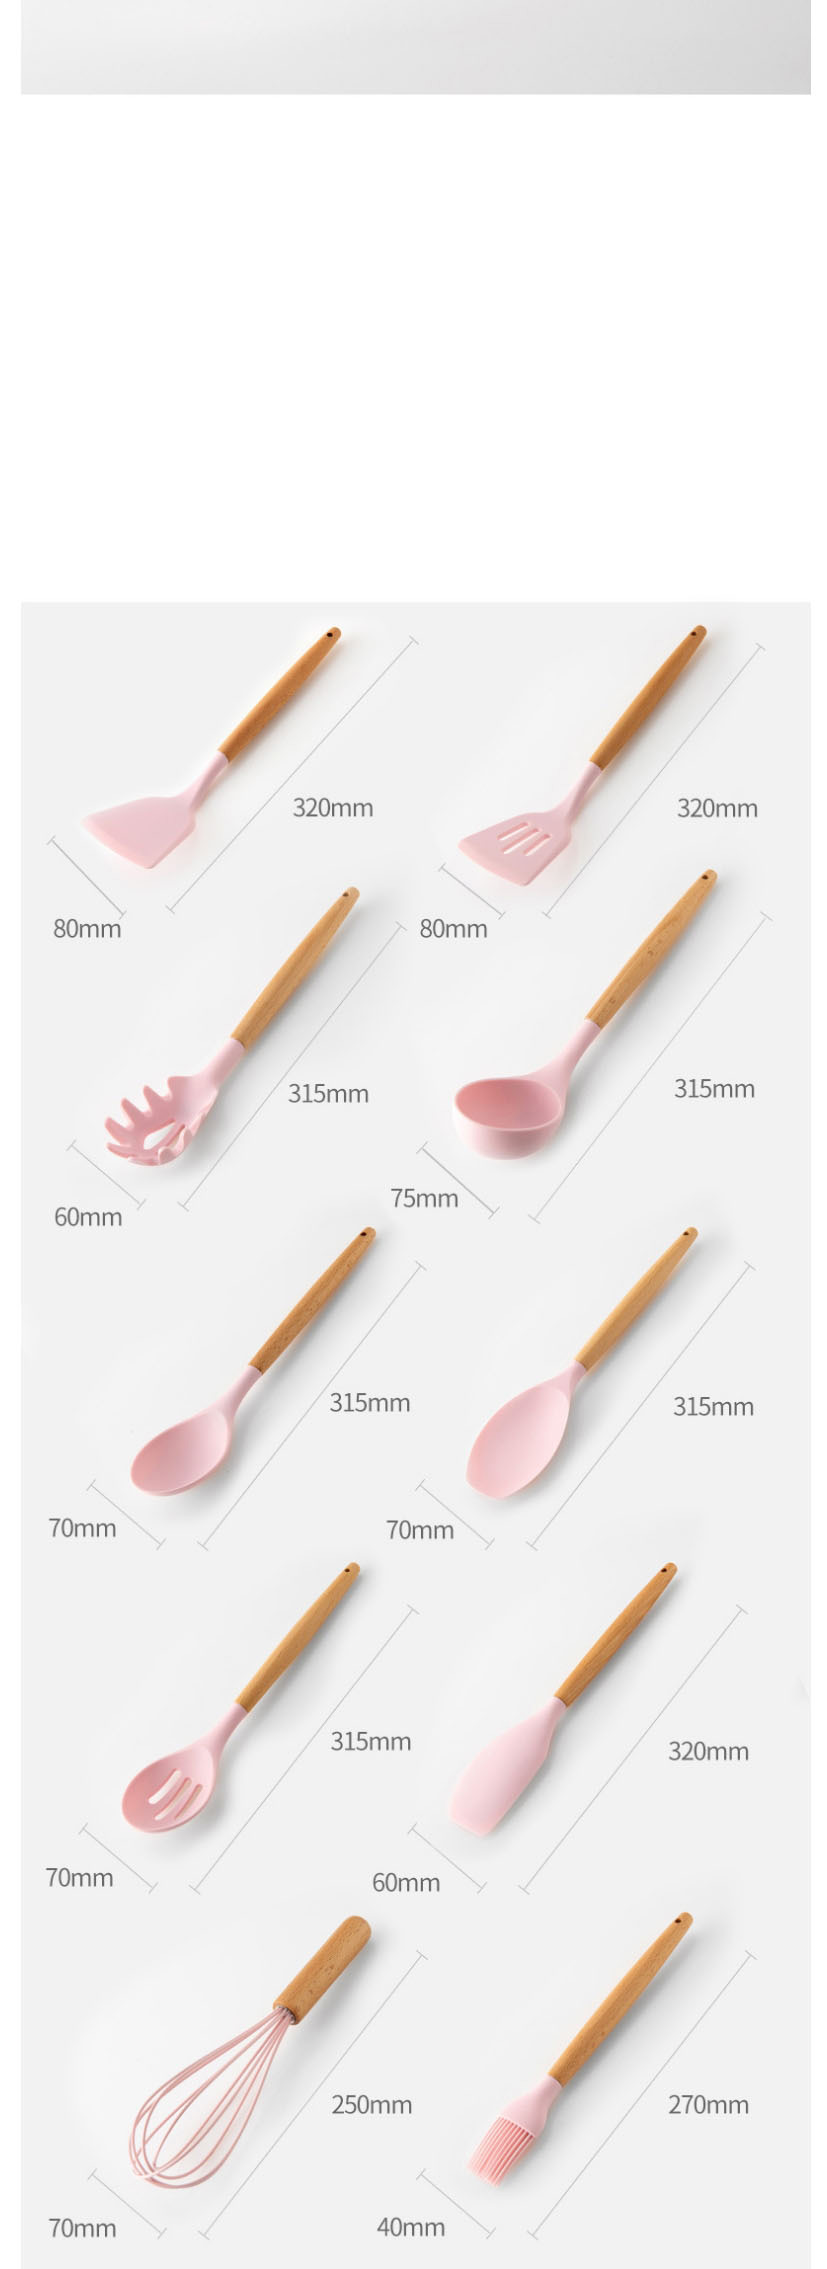 Fashion Nine Piece B Pink Solid Wood Handle With Bucket And Silica Gel Kitchenware,Kitchen